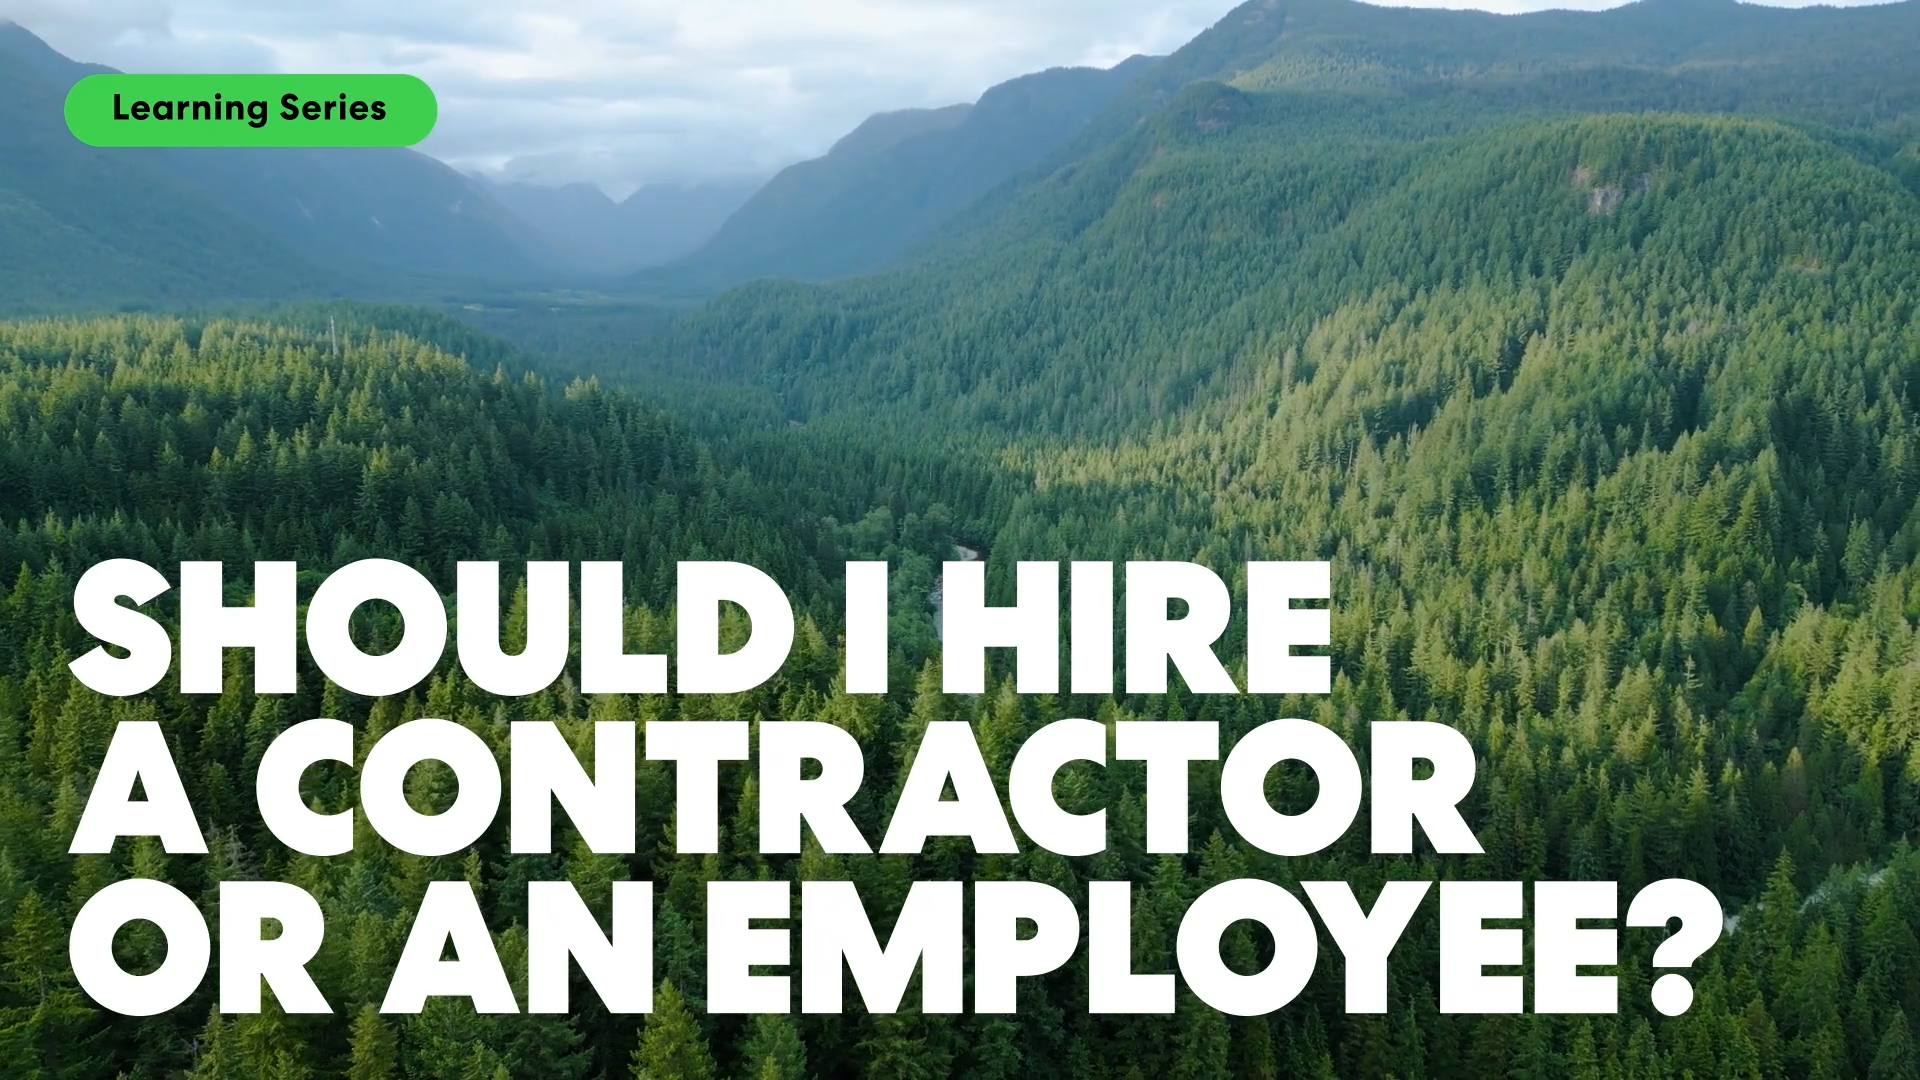 Should I Hire a Contractor or an Employee?